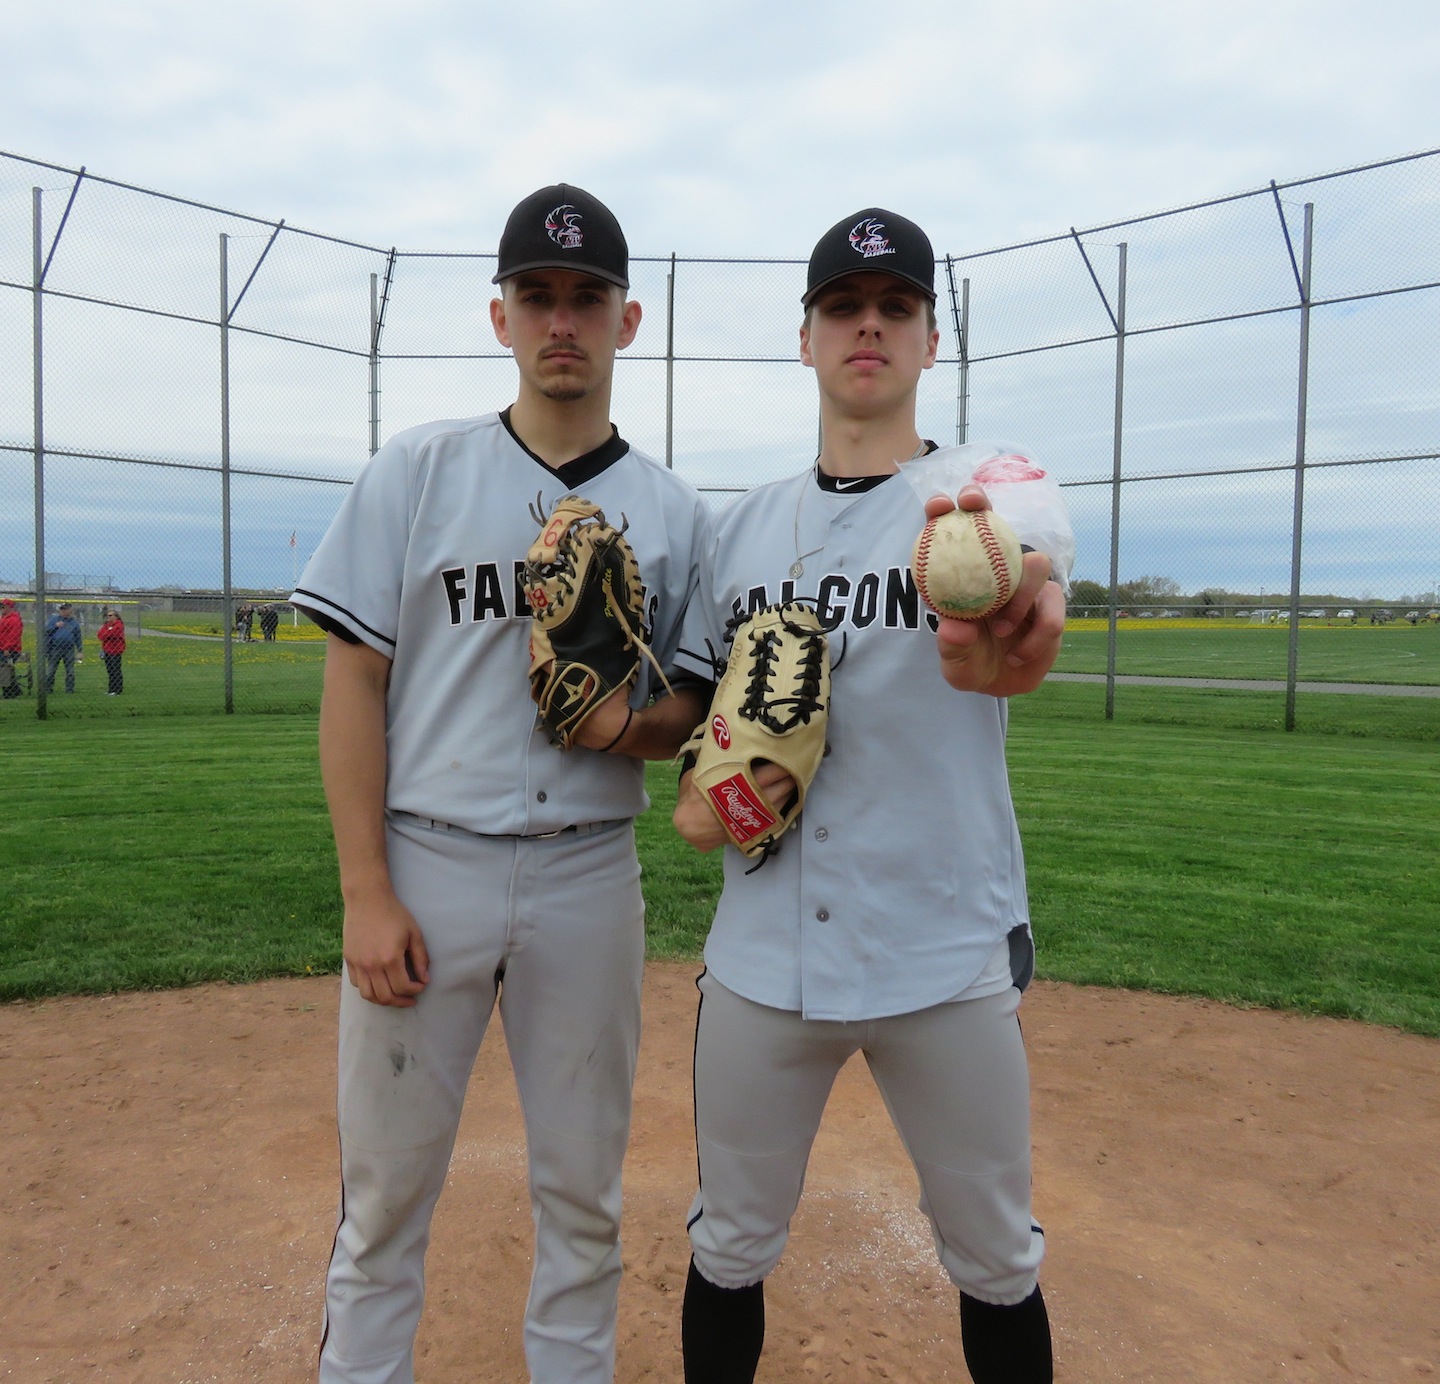 Pictured, Ethan Guthrie (catcher) and Tommy Peltier pose with the game ball from the lefty's no hitter versus Lockport. (Photos by David Yarger)